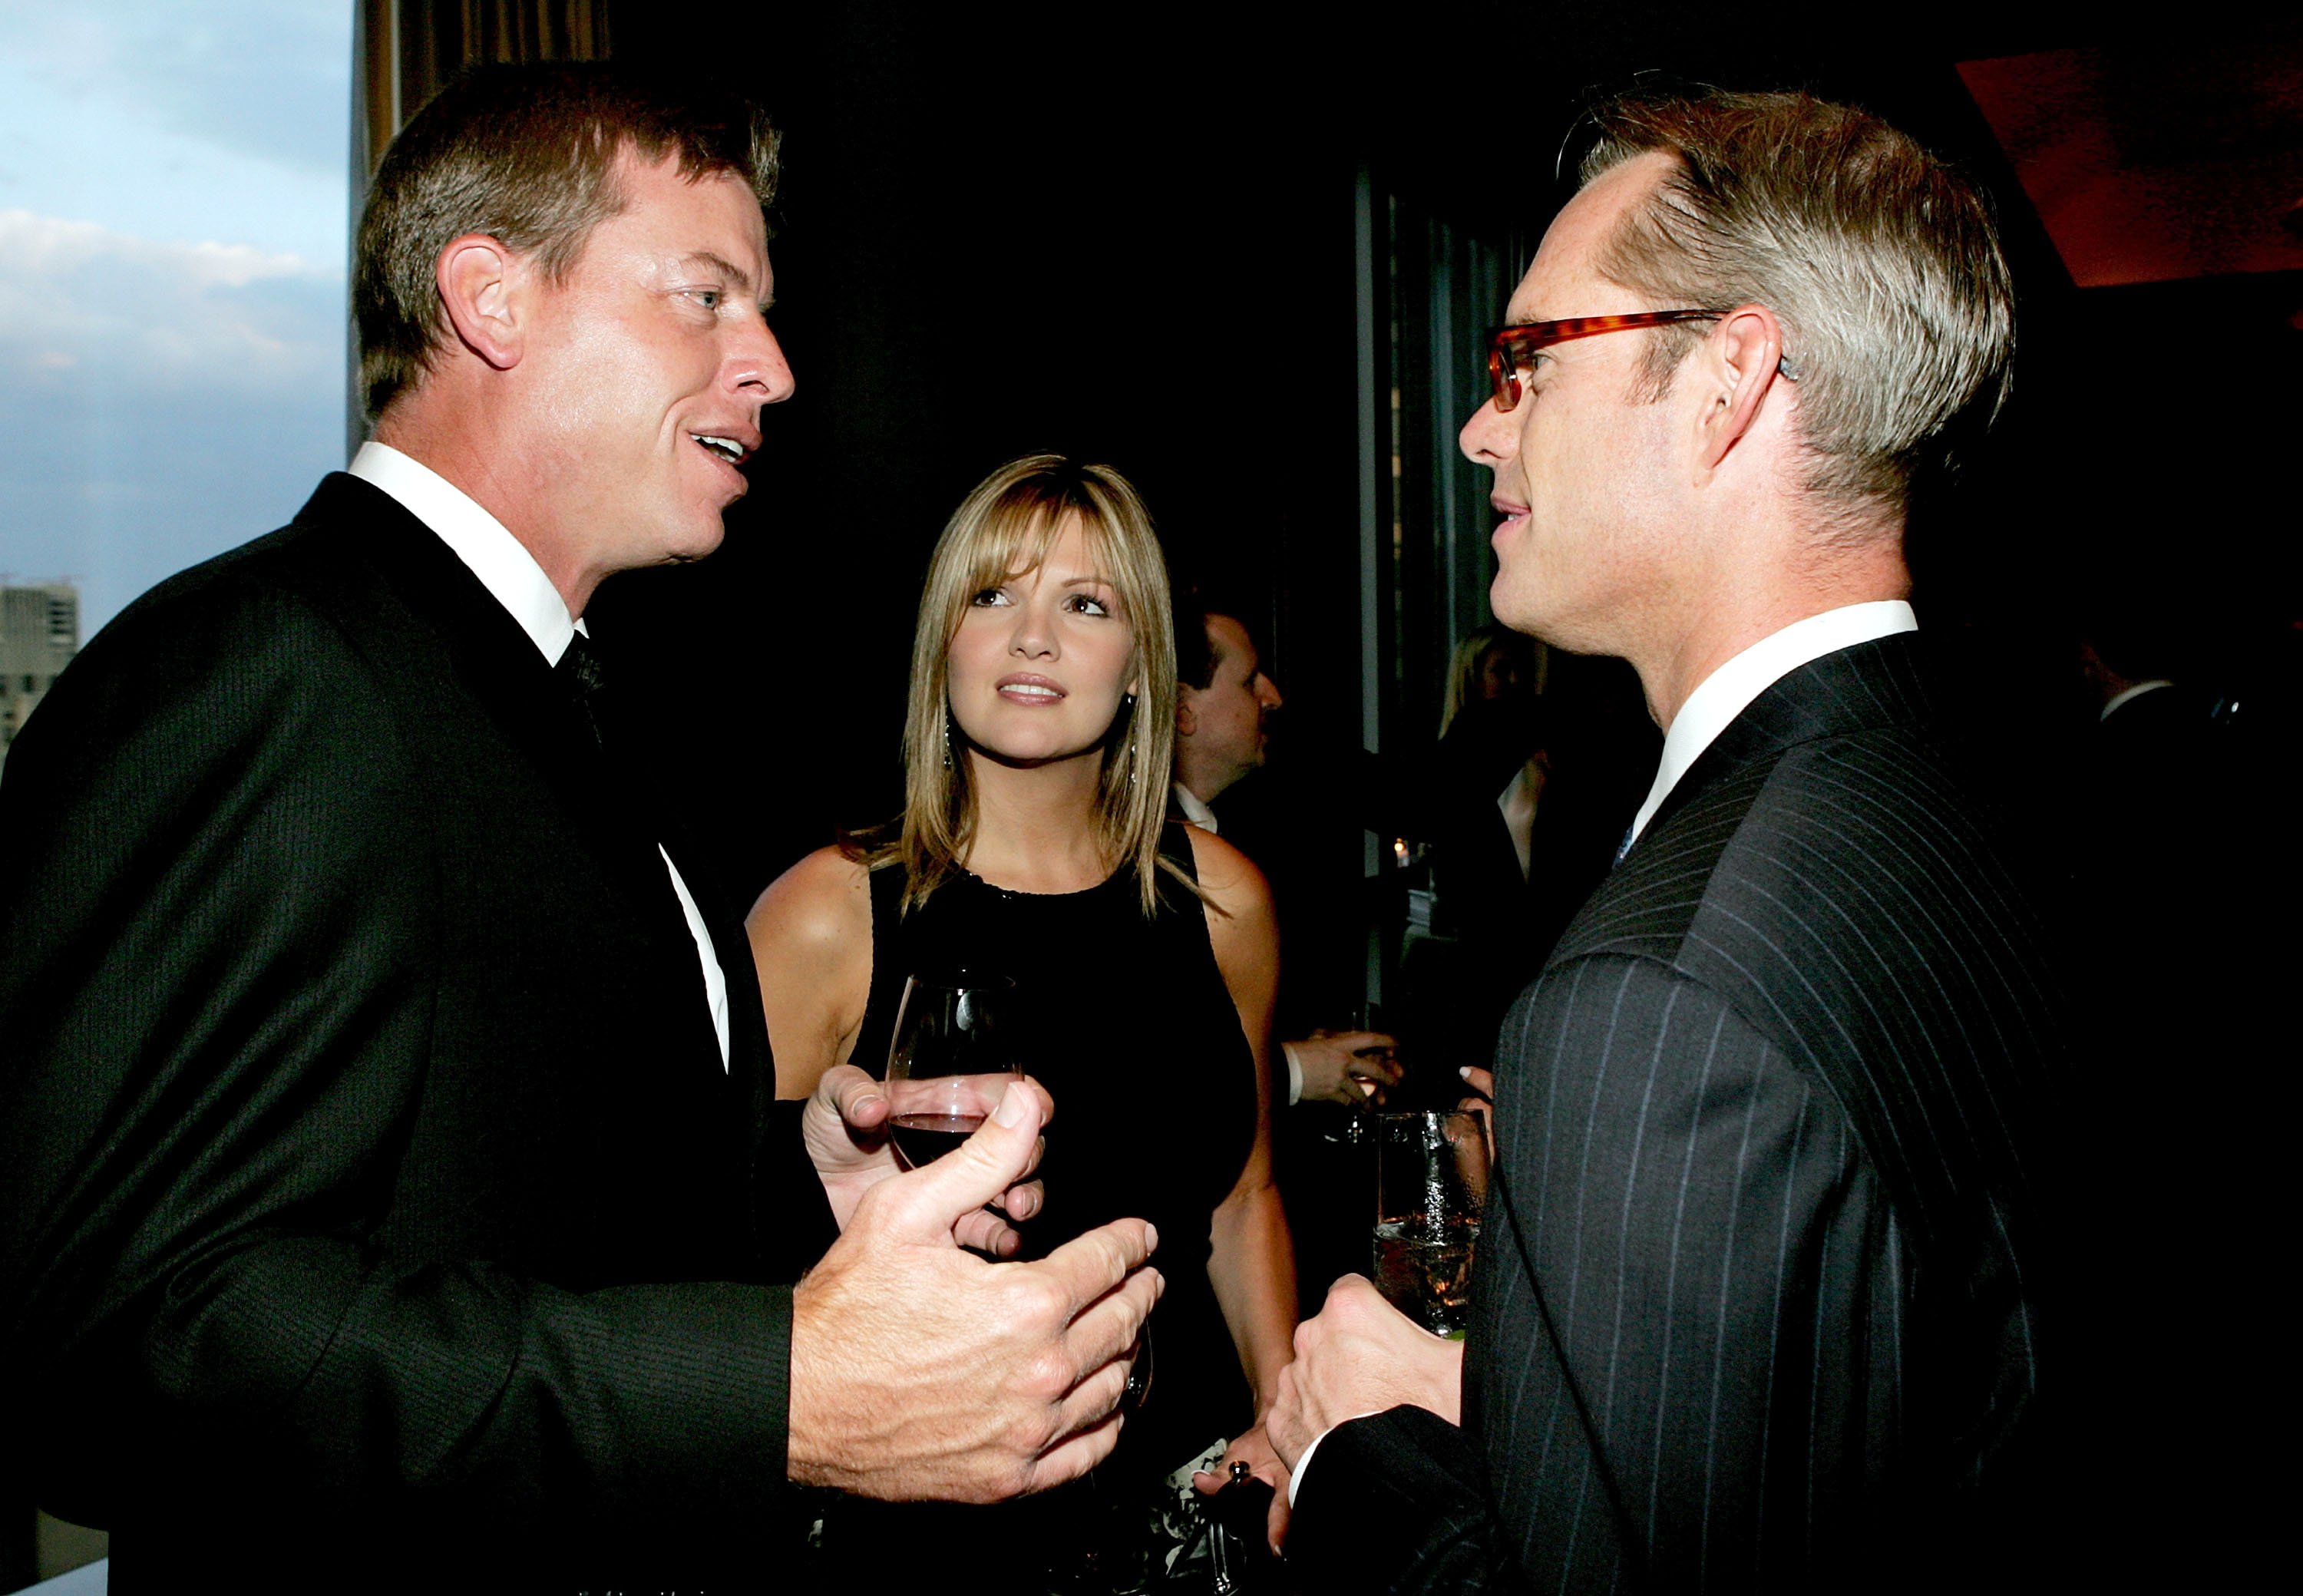 Joe Buck and Troy Aikman in conversation with Rhonda Worthey at the Syracuse University's S.I. Newhouse School of Public Communications Gala May 3, 2005, in New York City. | Source: Getty Images